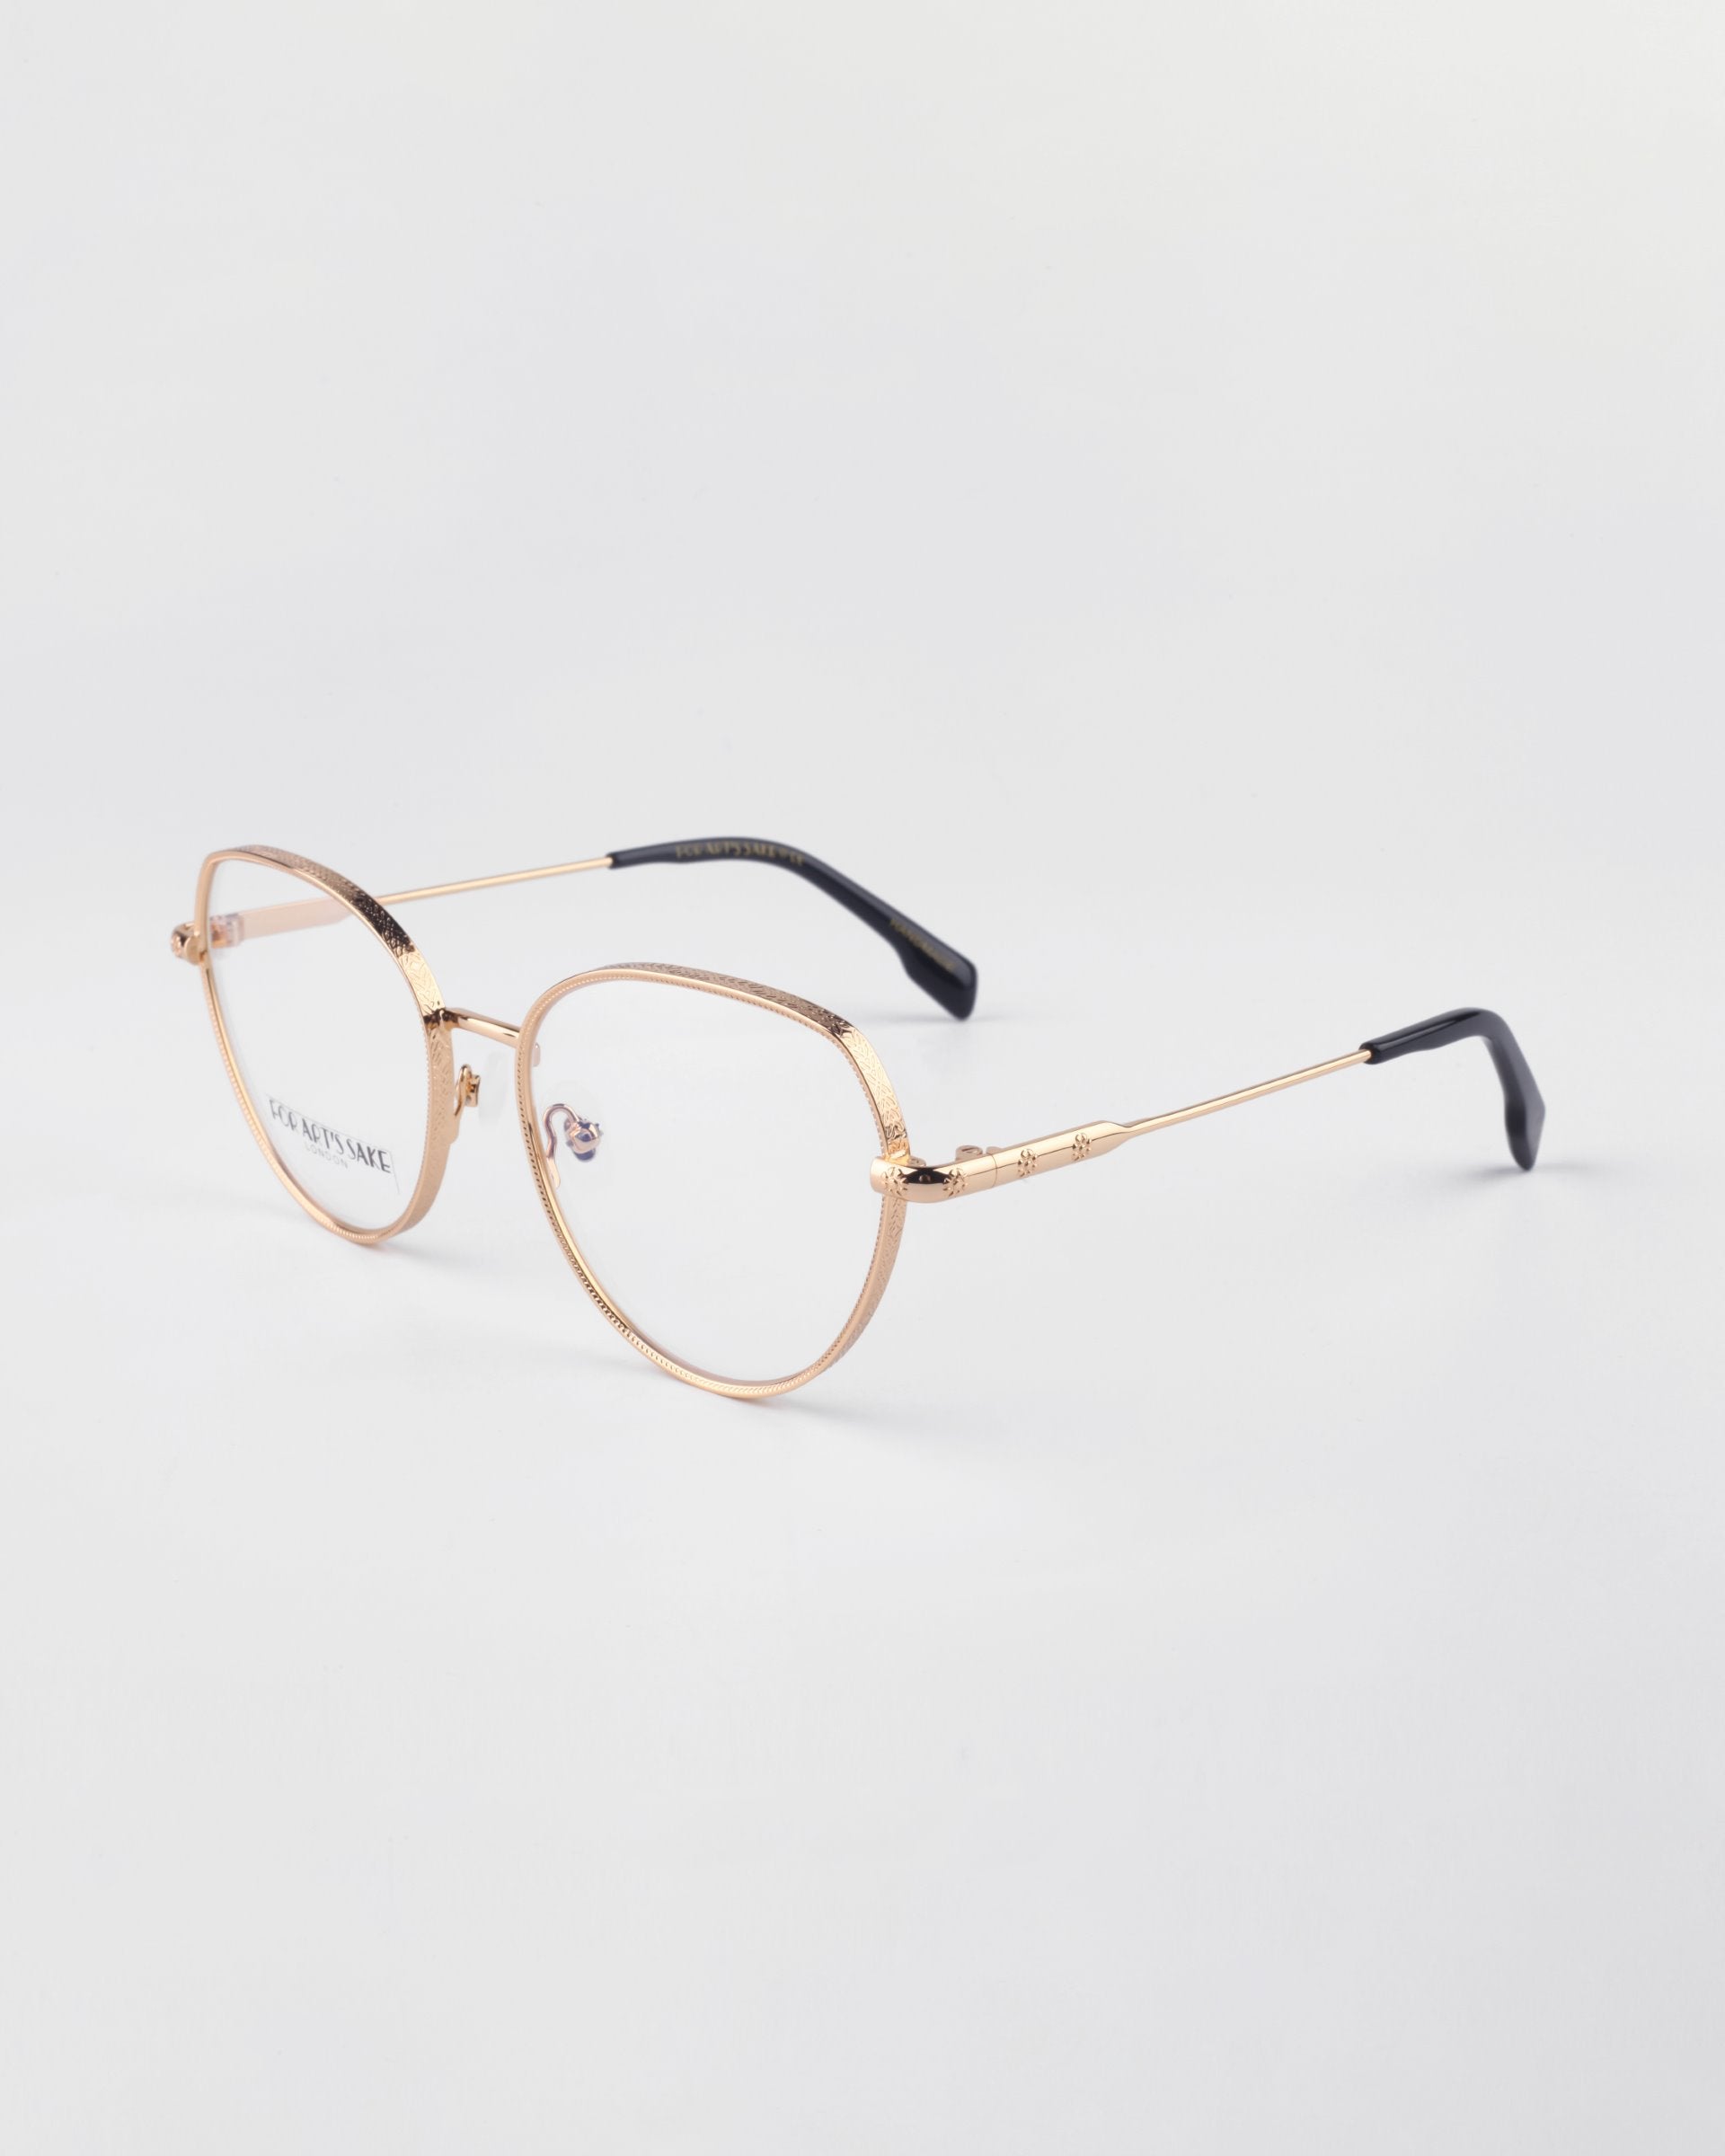 A pair of Frida Floral eyeglasses by For Art&#39;s Sake® with round lenses and black temple tips rests on a white surface. The glasses have a sleek, minimalist design with thin metal frames, a subtle bridge, and prescription lenses.